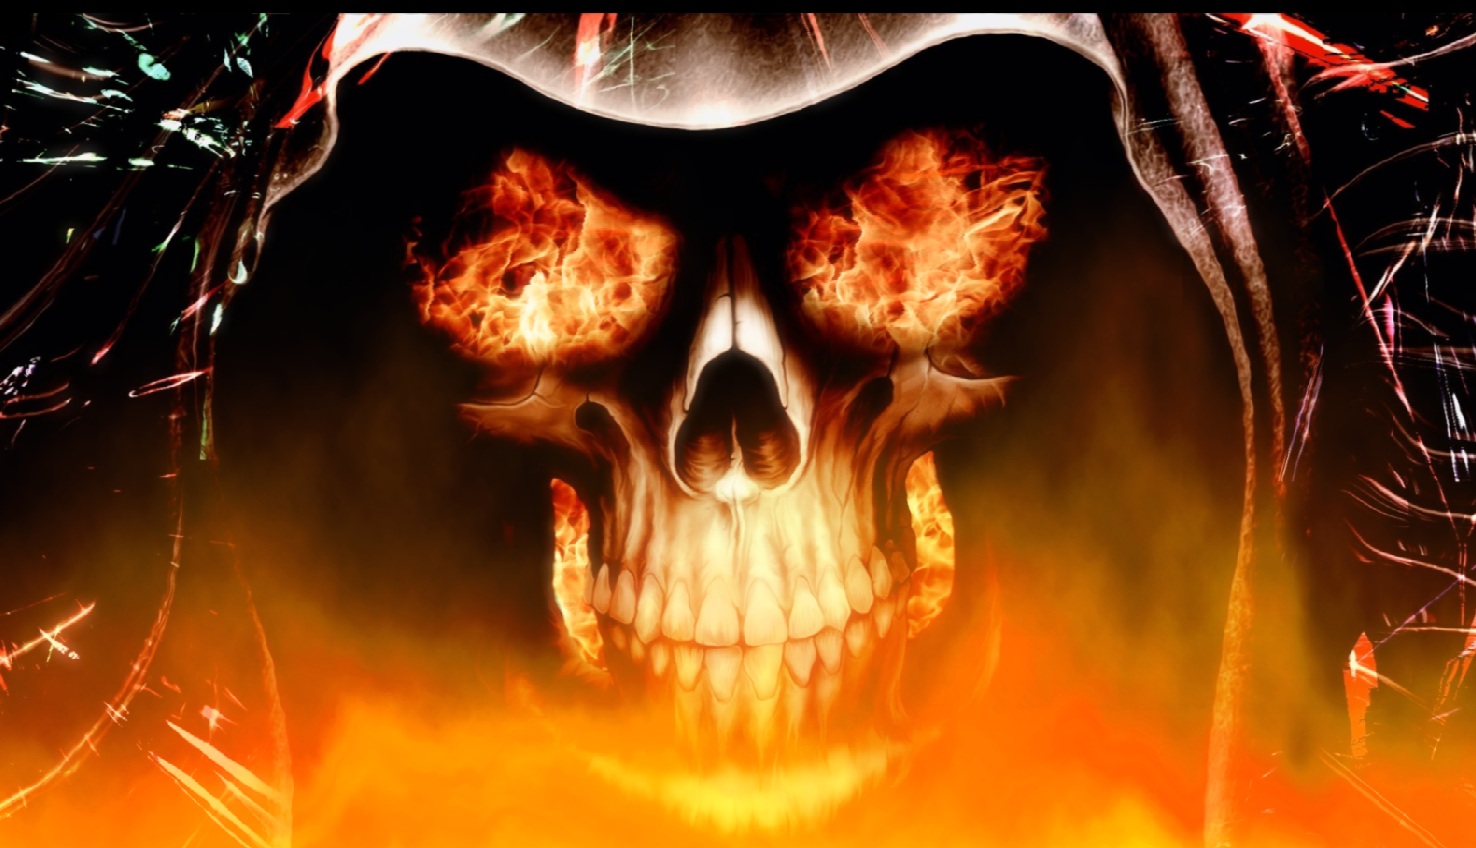 Fire Skull Background Image Amp Pictures Becuo